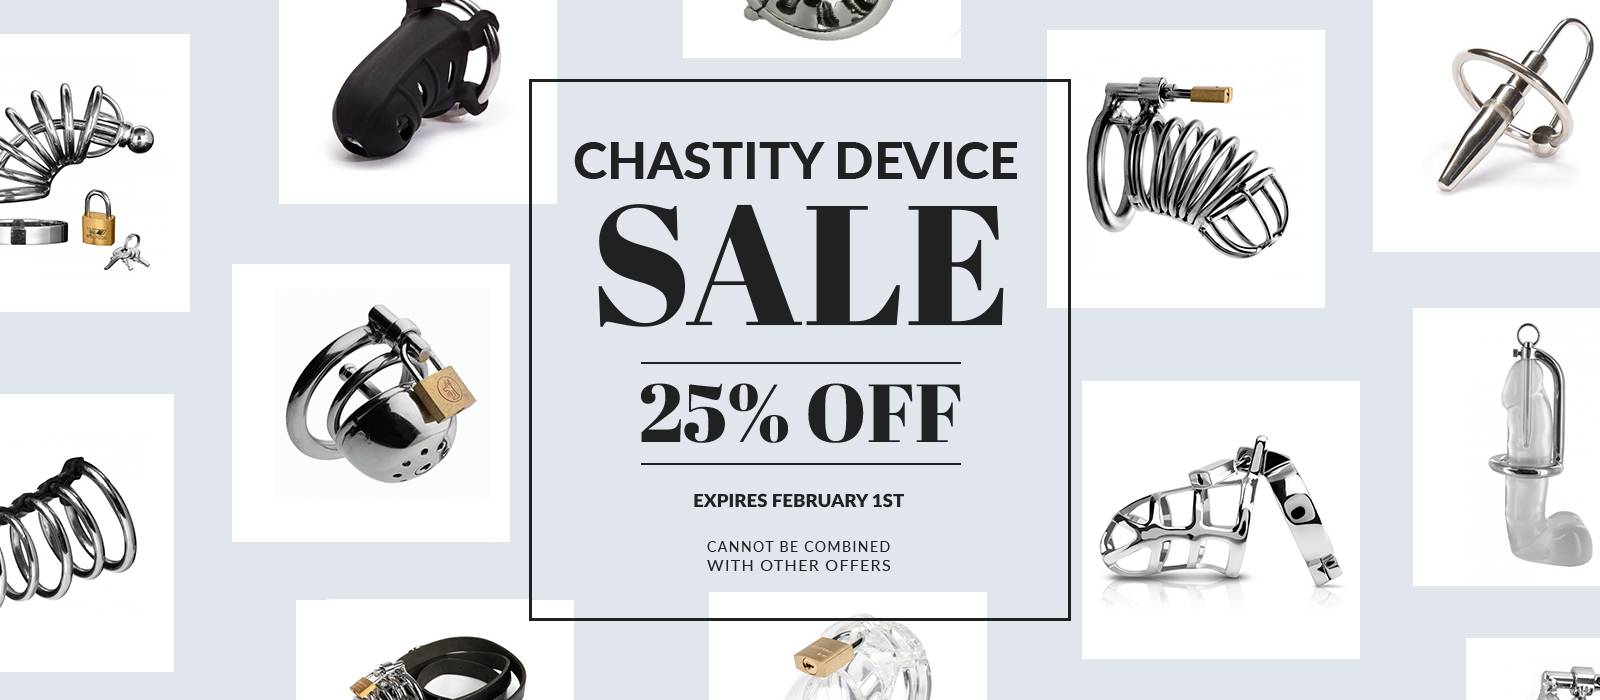 Chastity Device Sale 25% off